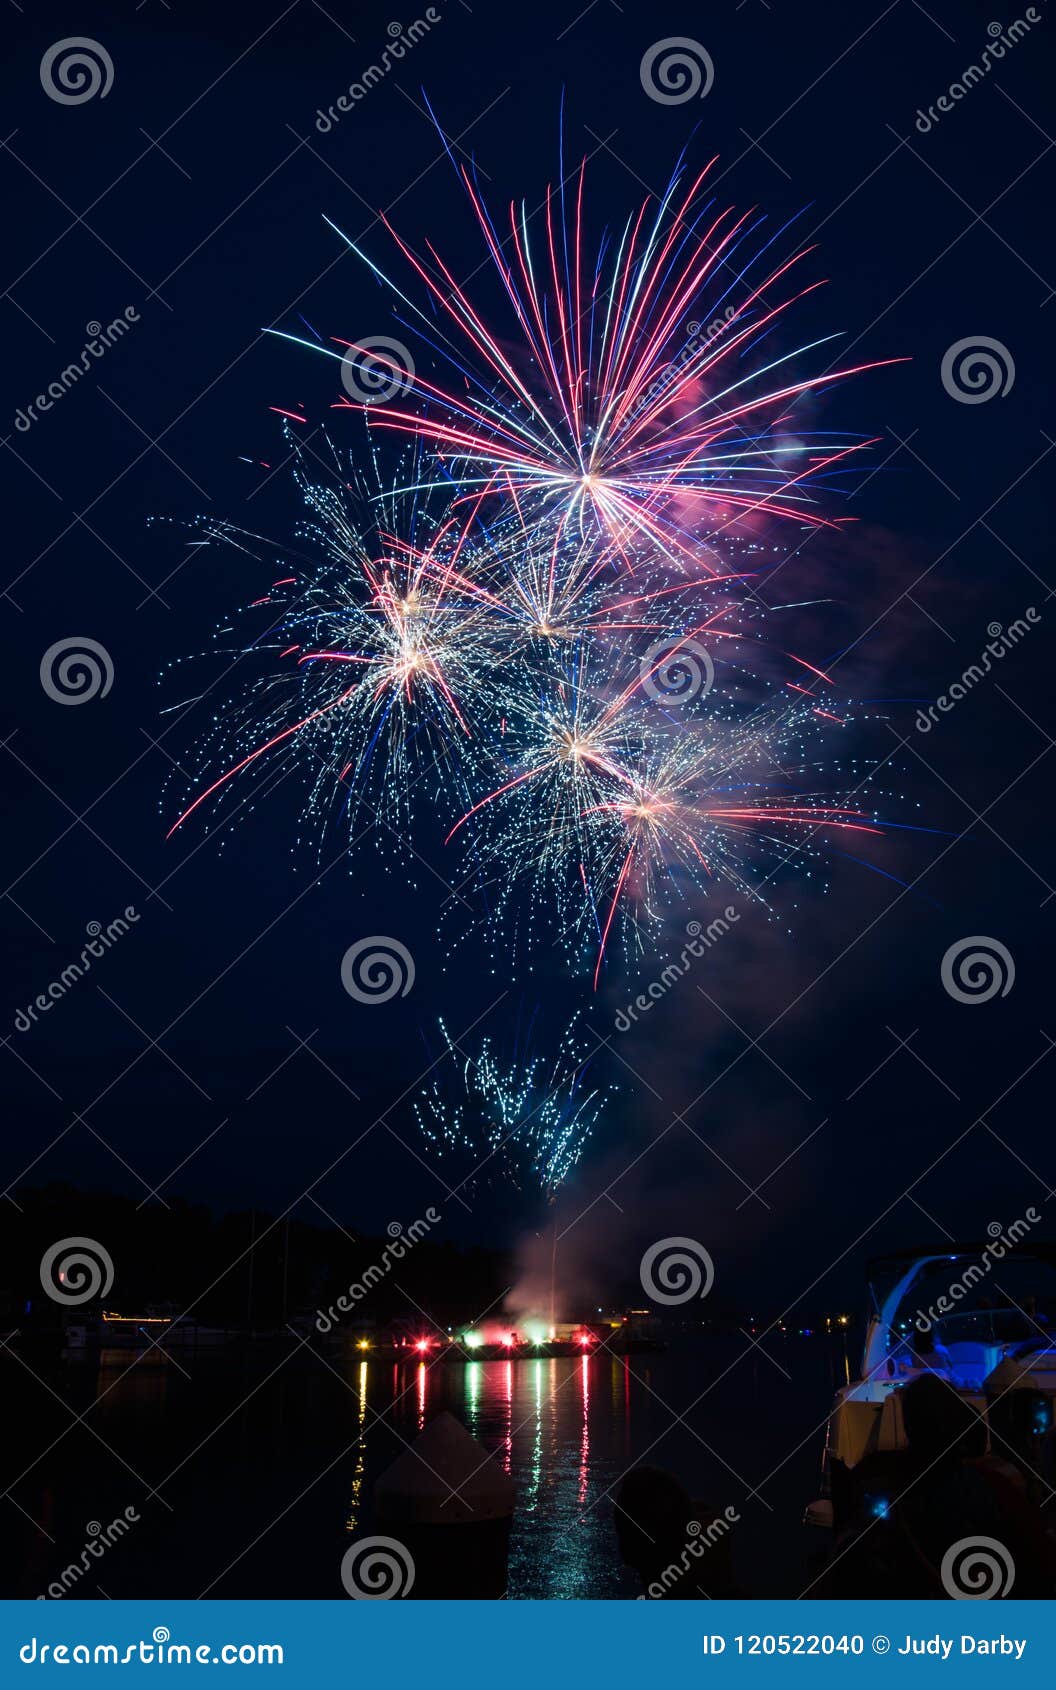 fireworks launched from a river barge with lights reflected in the water.